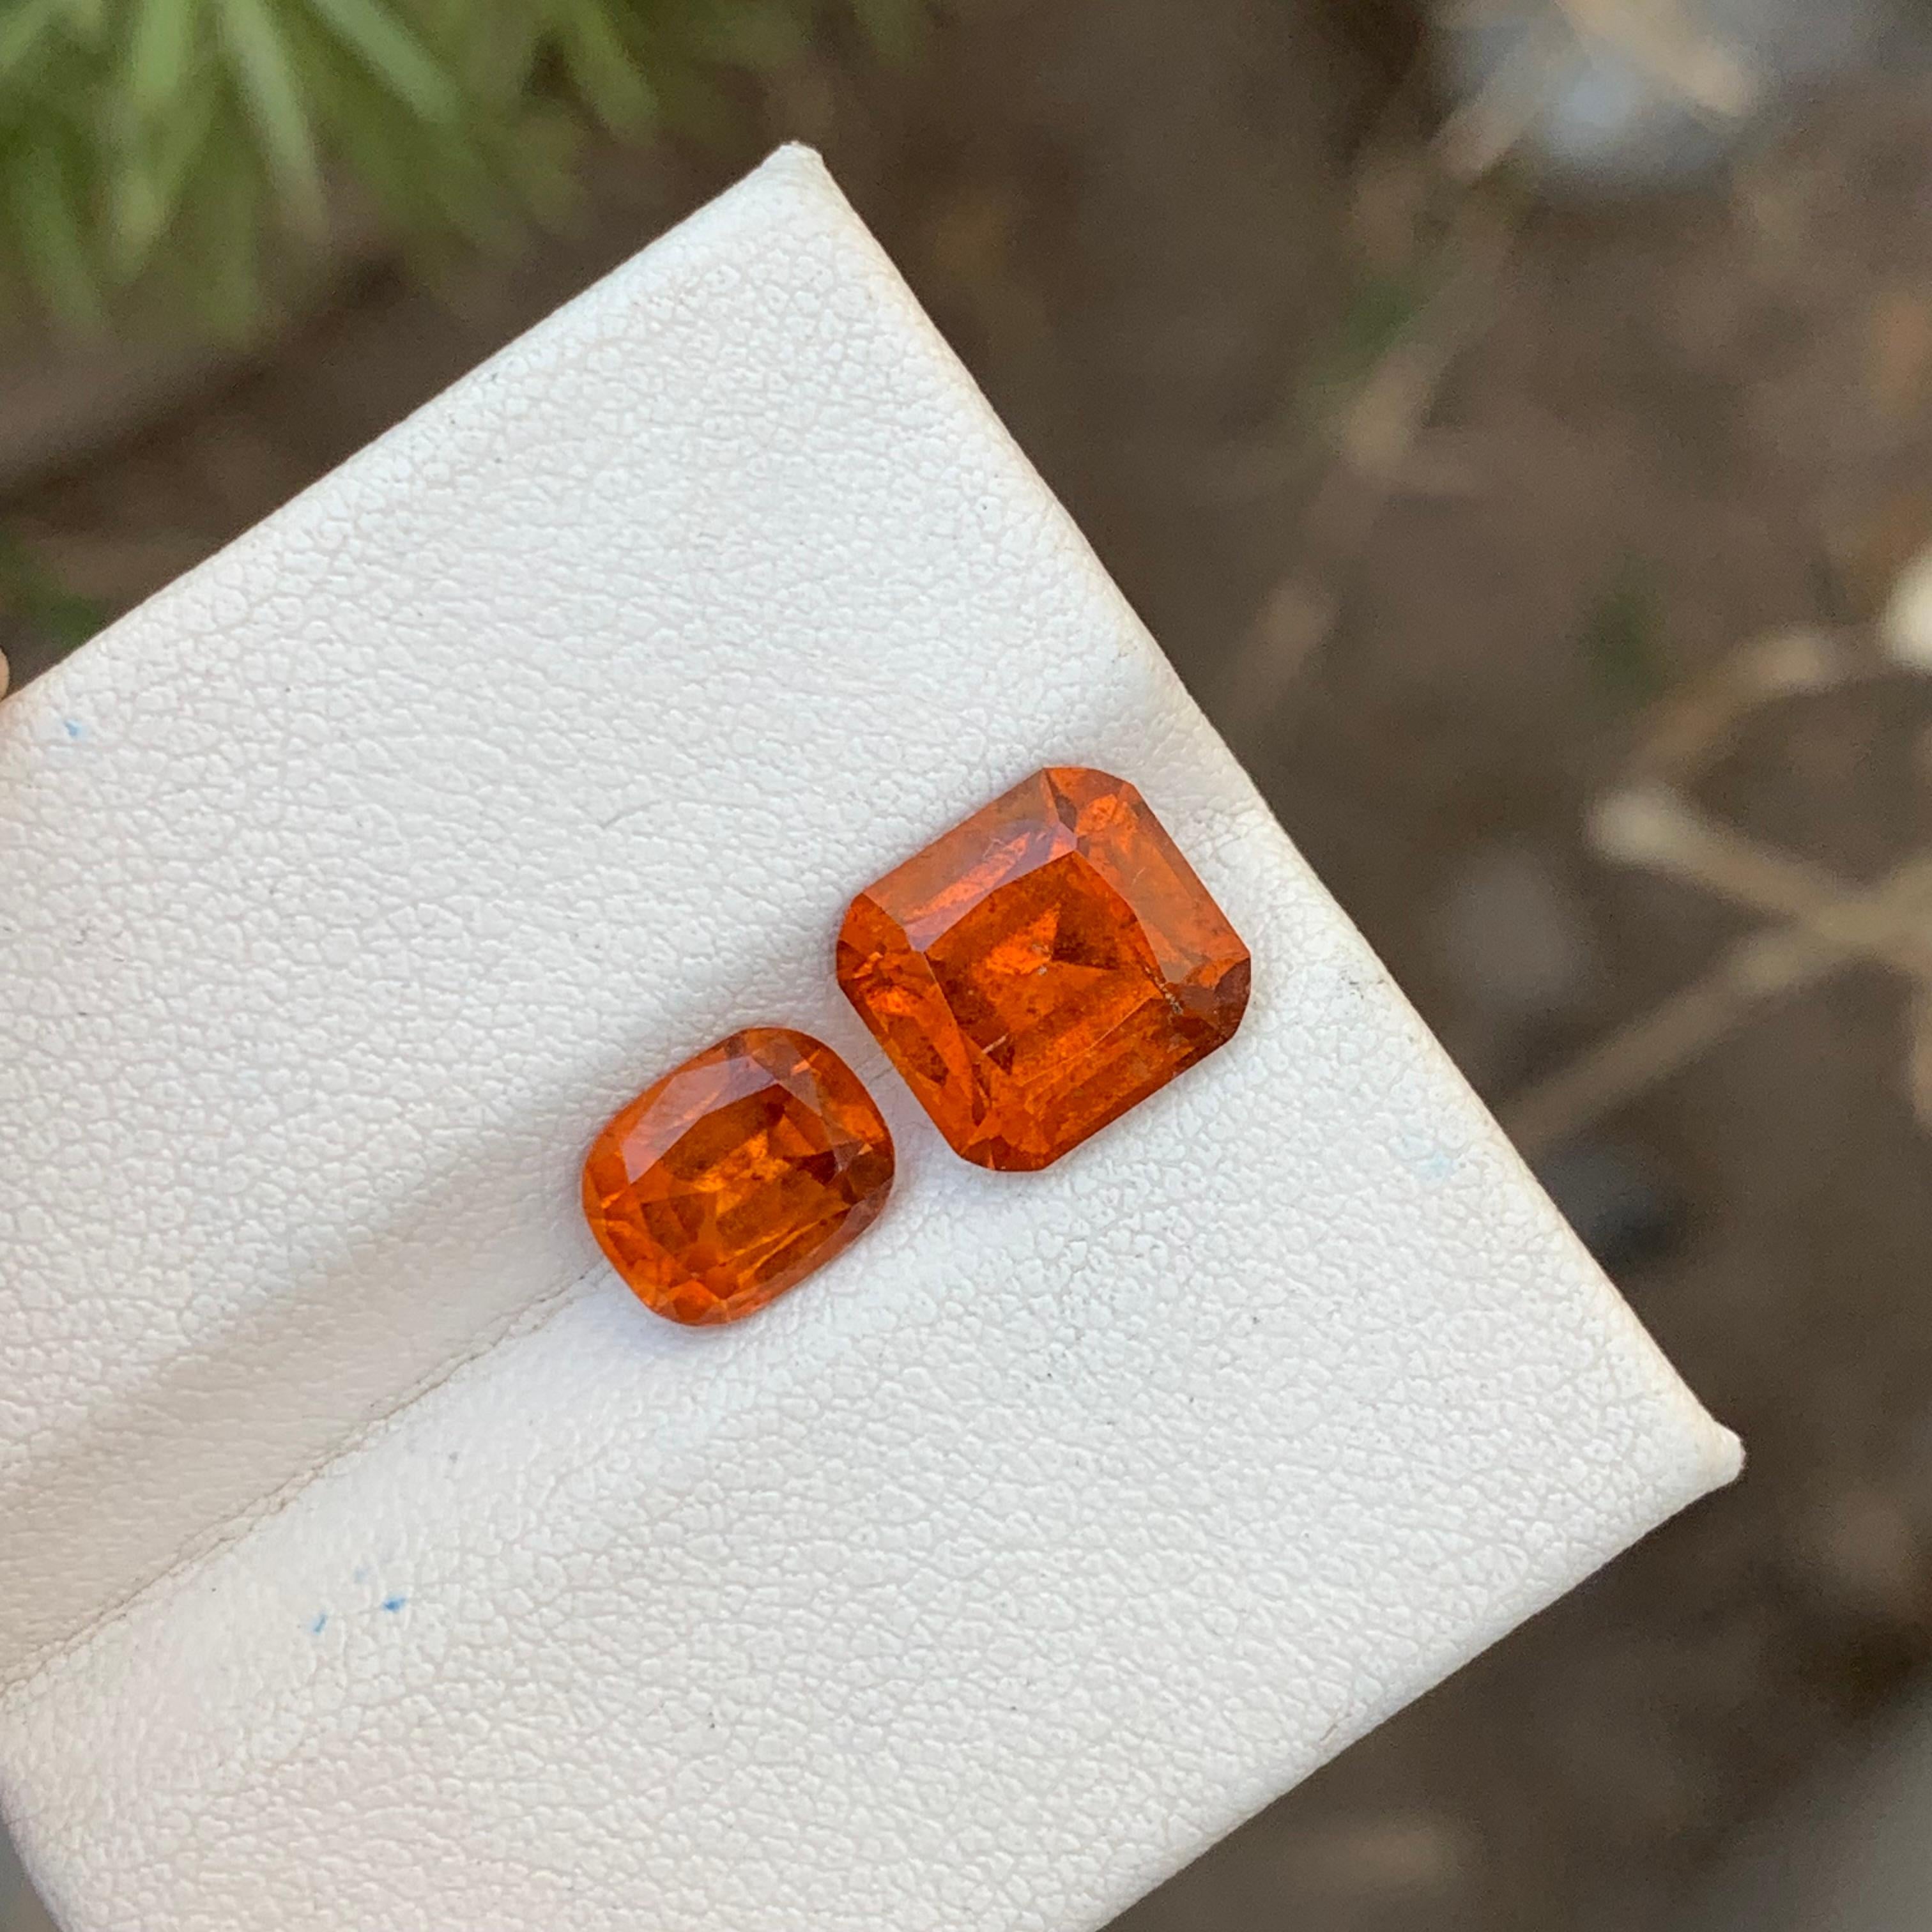 5.95 Carats Natural Loose Hessonite Garnet 2 Pieces For Ring Jewelry Making  en vente 8